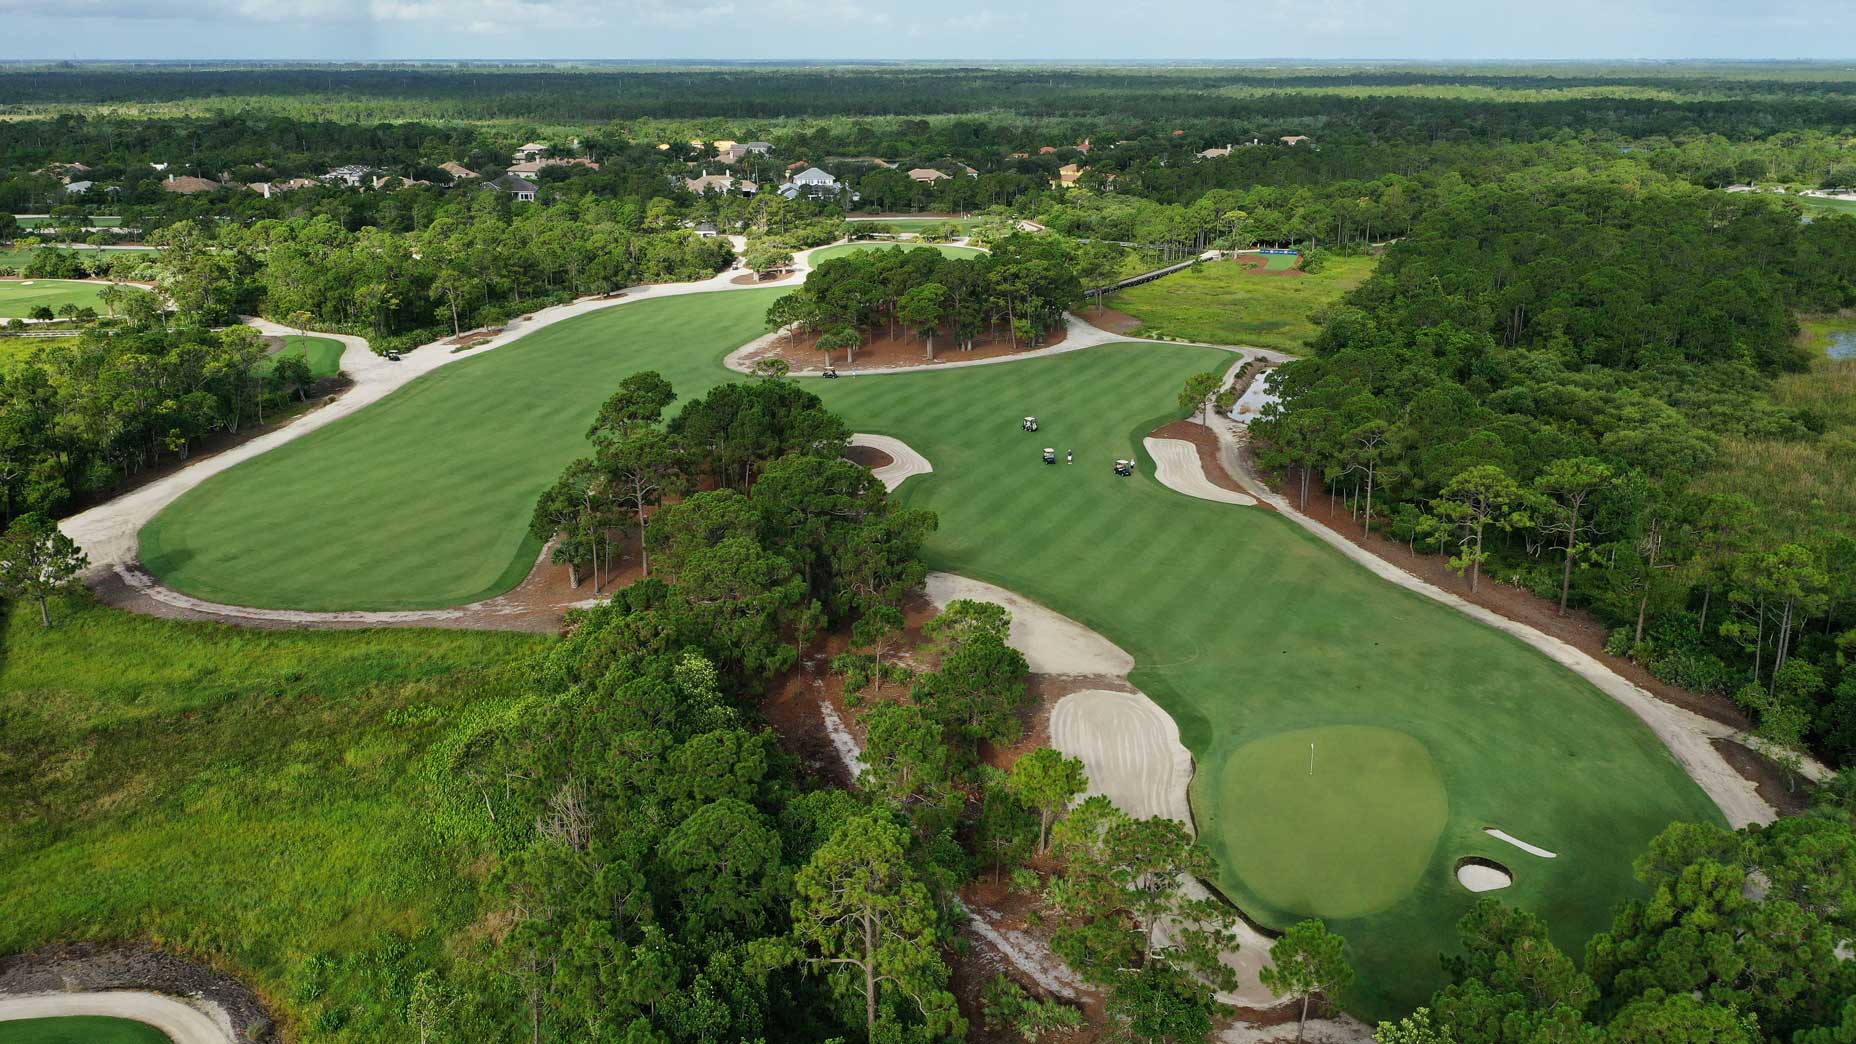 An aerial drone view of the 5th hole at Medalist Golf Club.